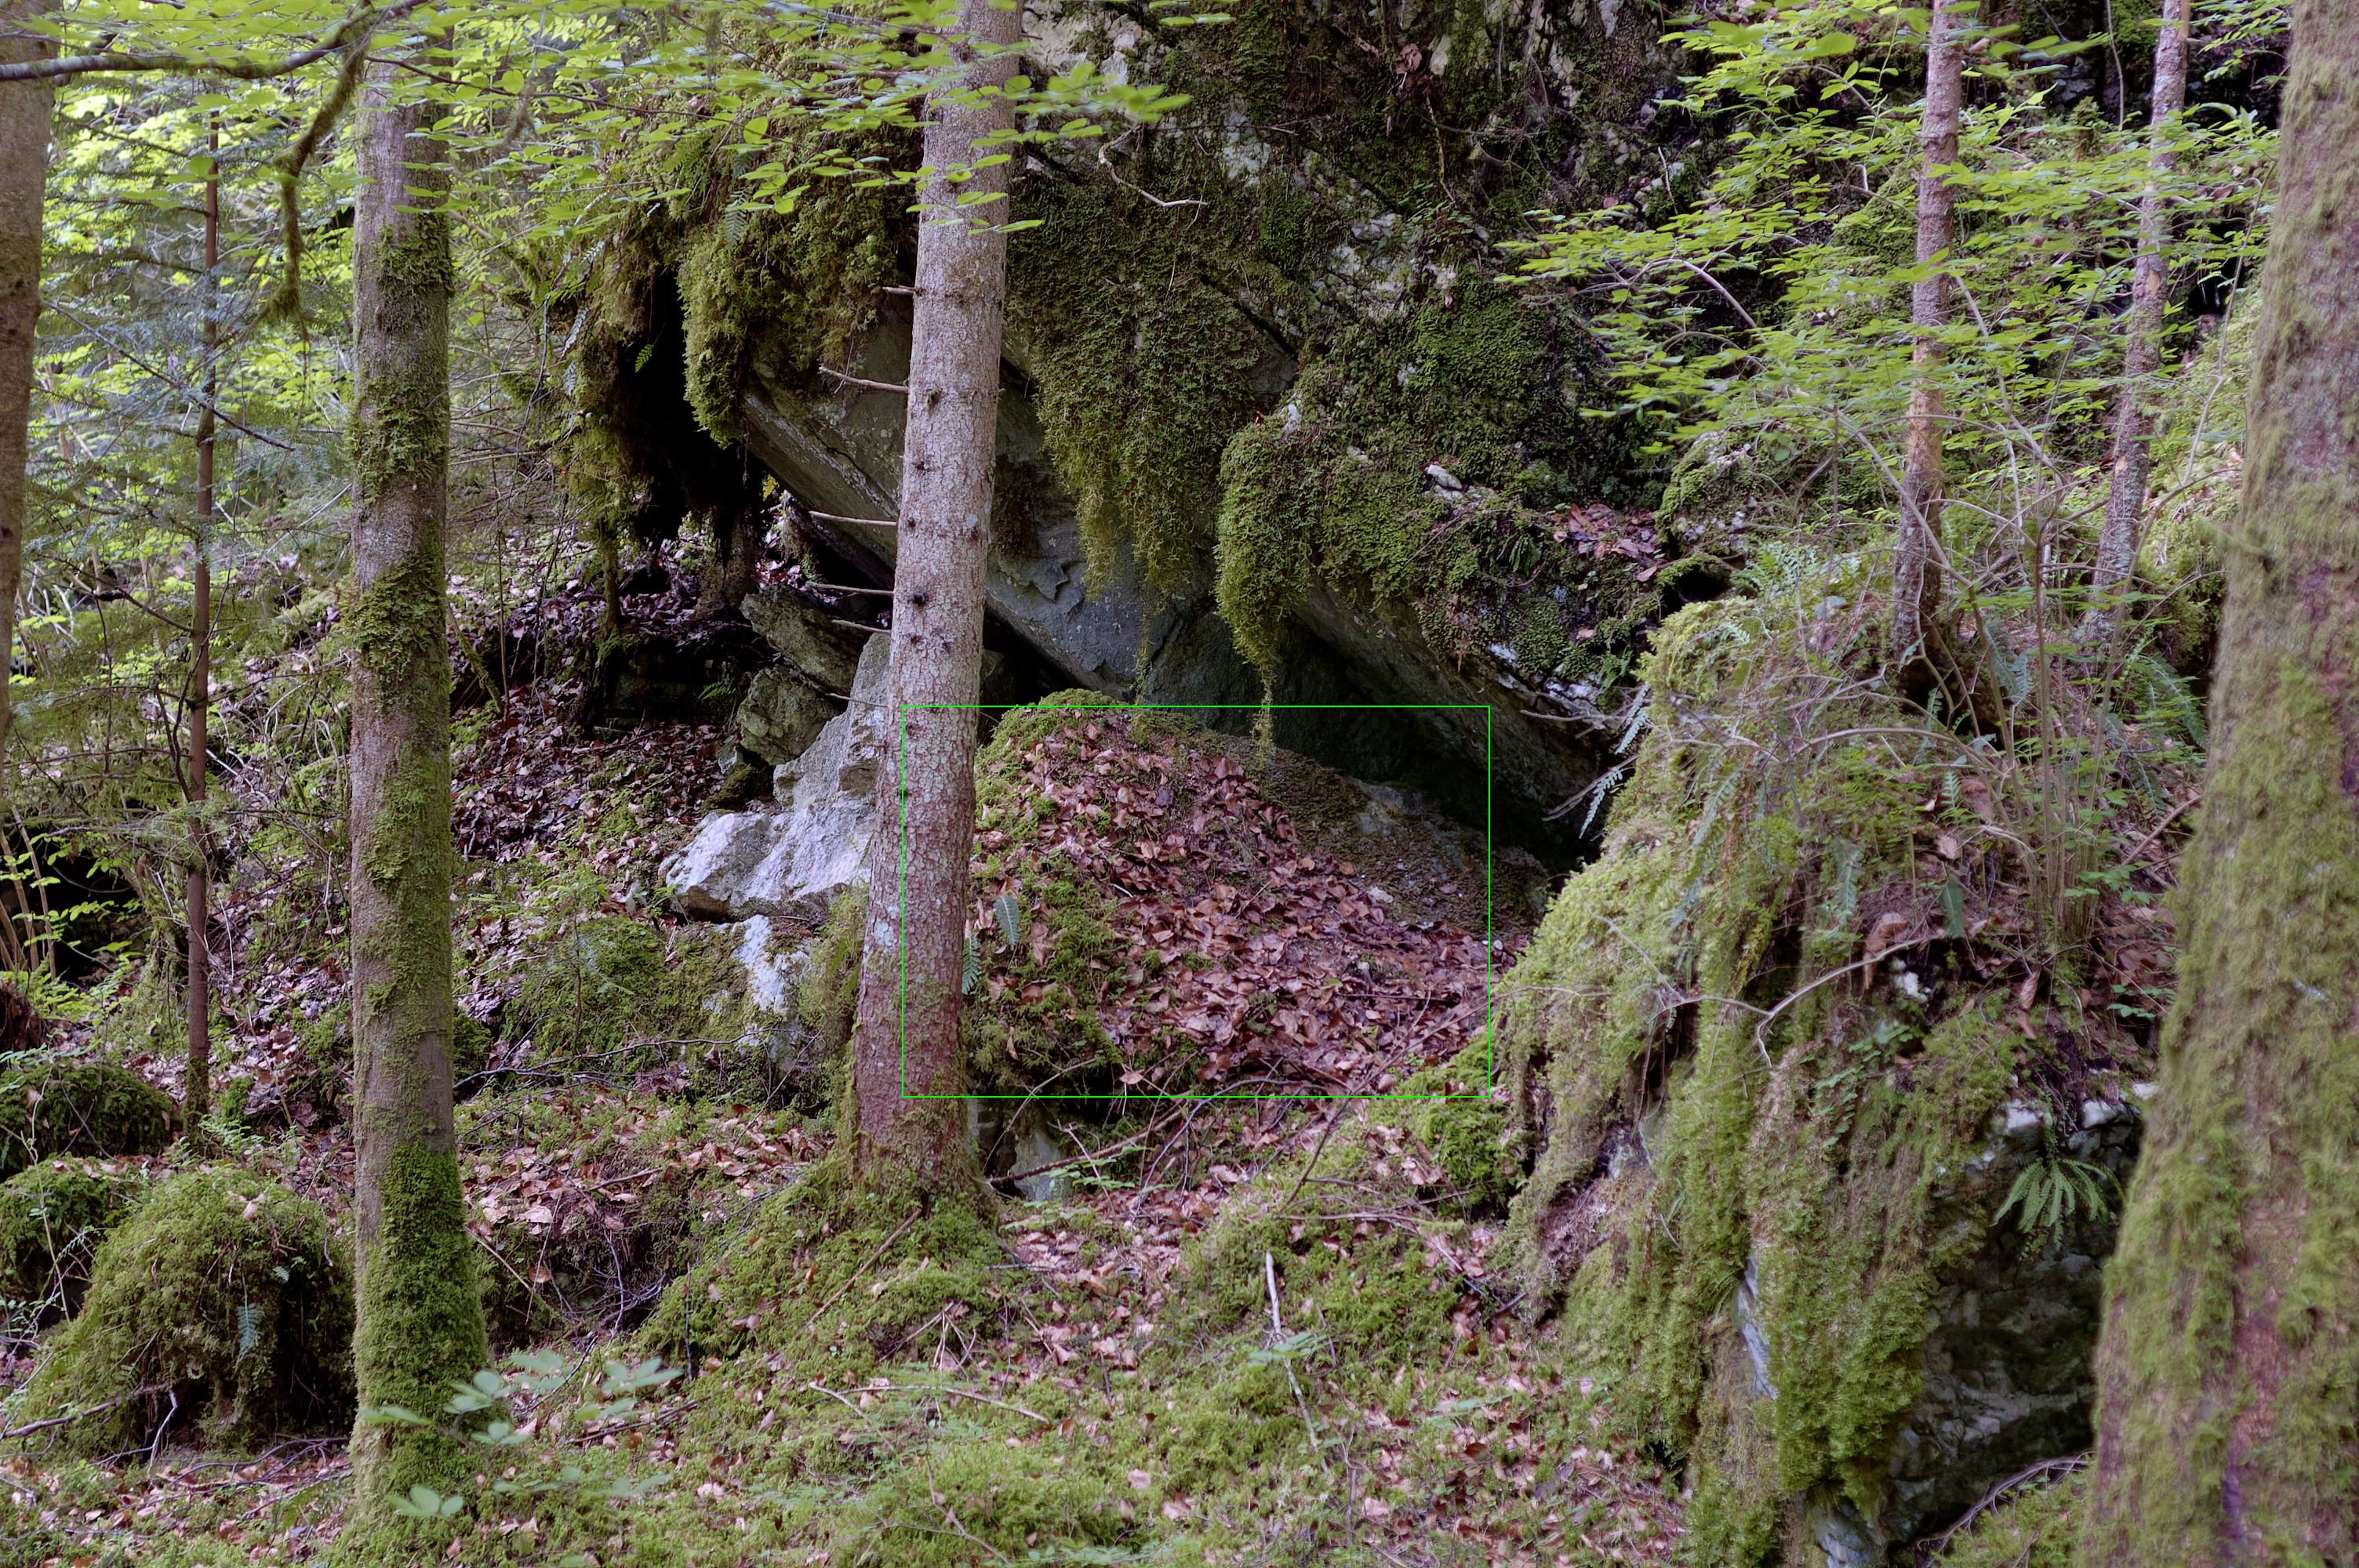 Woods near La Goule, Switzerland, May 2006 – Nikon D70 – ISO 1600 – 1/60 – ƒ/2.8 – 75mm – Exp. -⅓. (Click to download the raw file)